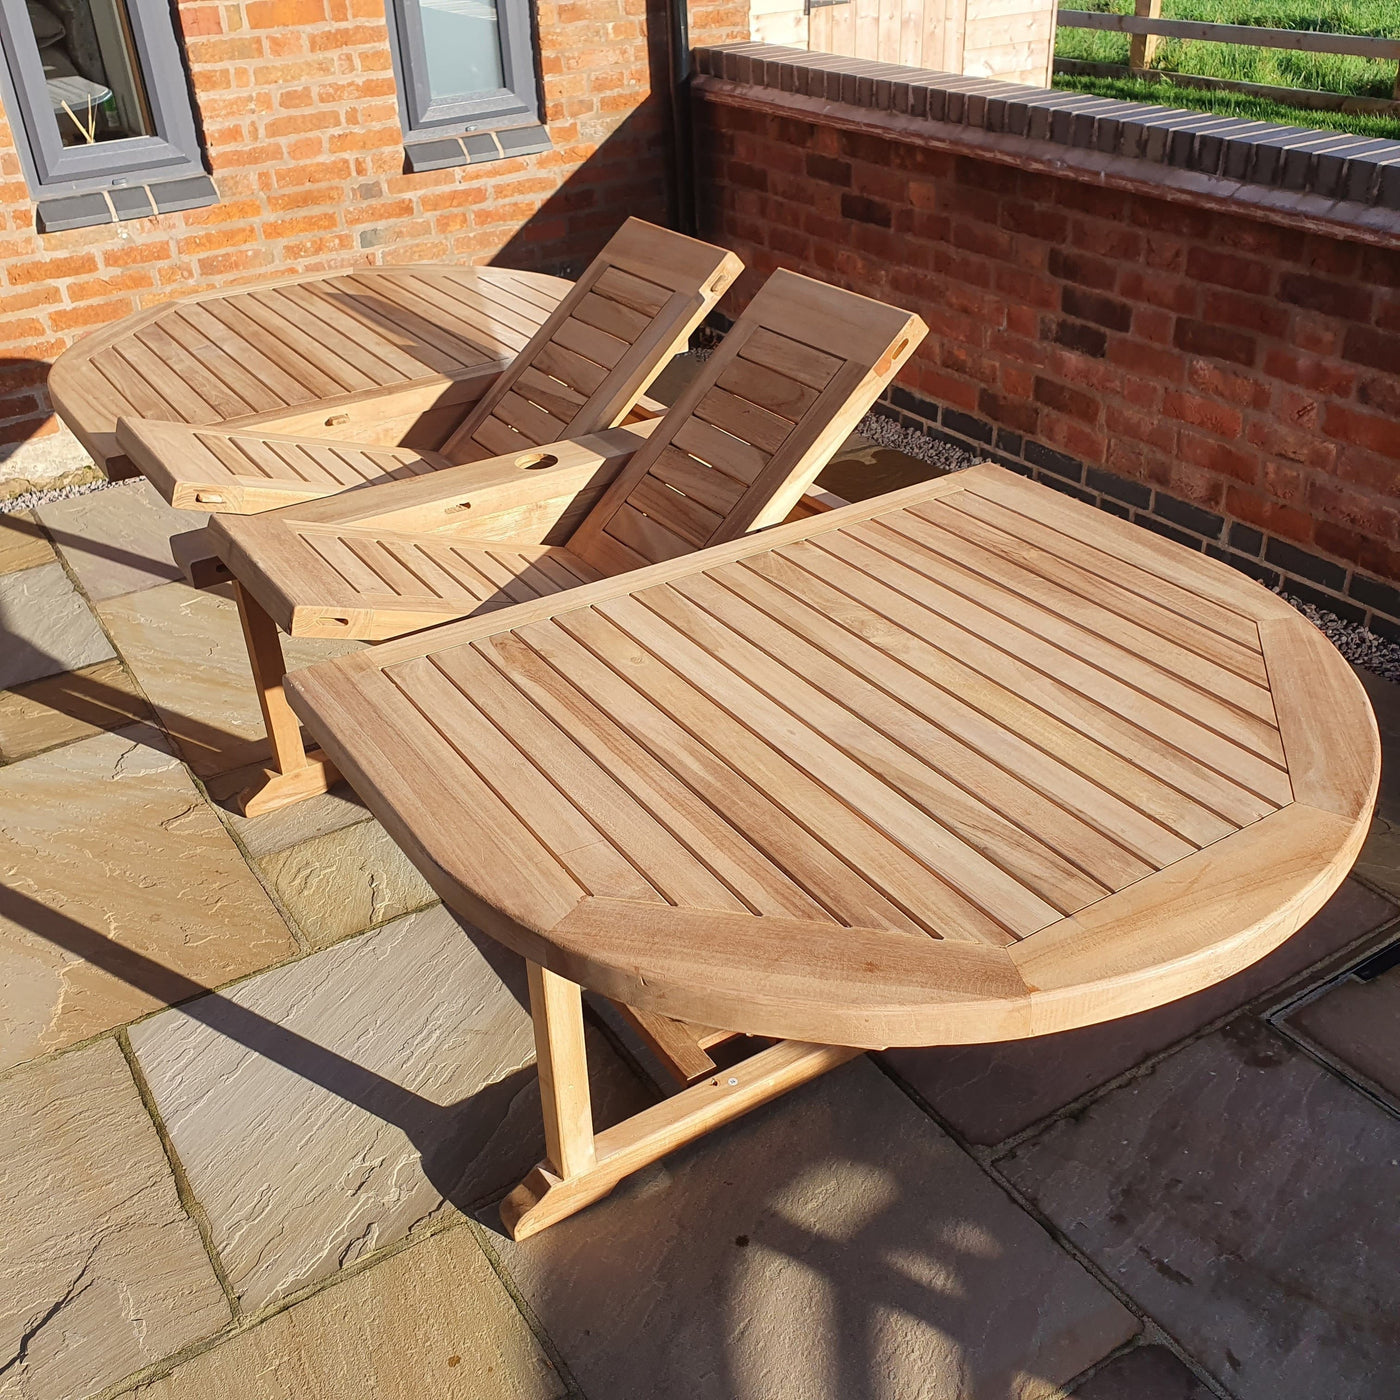 Two Premium Teak Oval 180-240cm garden furniture sets (with 8 Oxford stacking chairs) cushions included on a brick patio, bathed in sunlight.